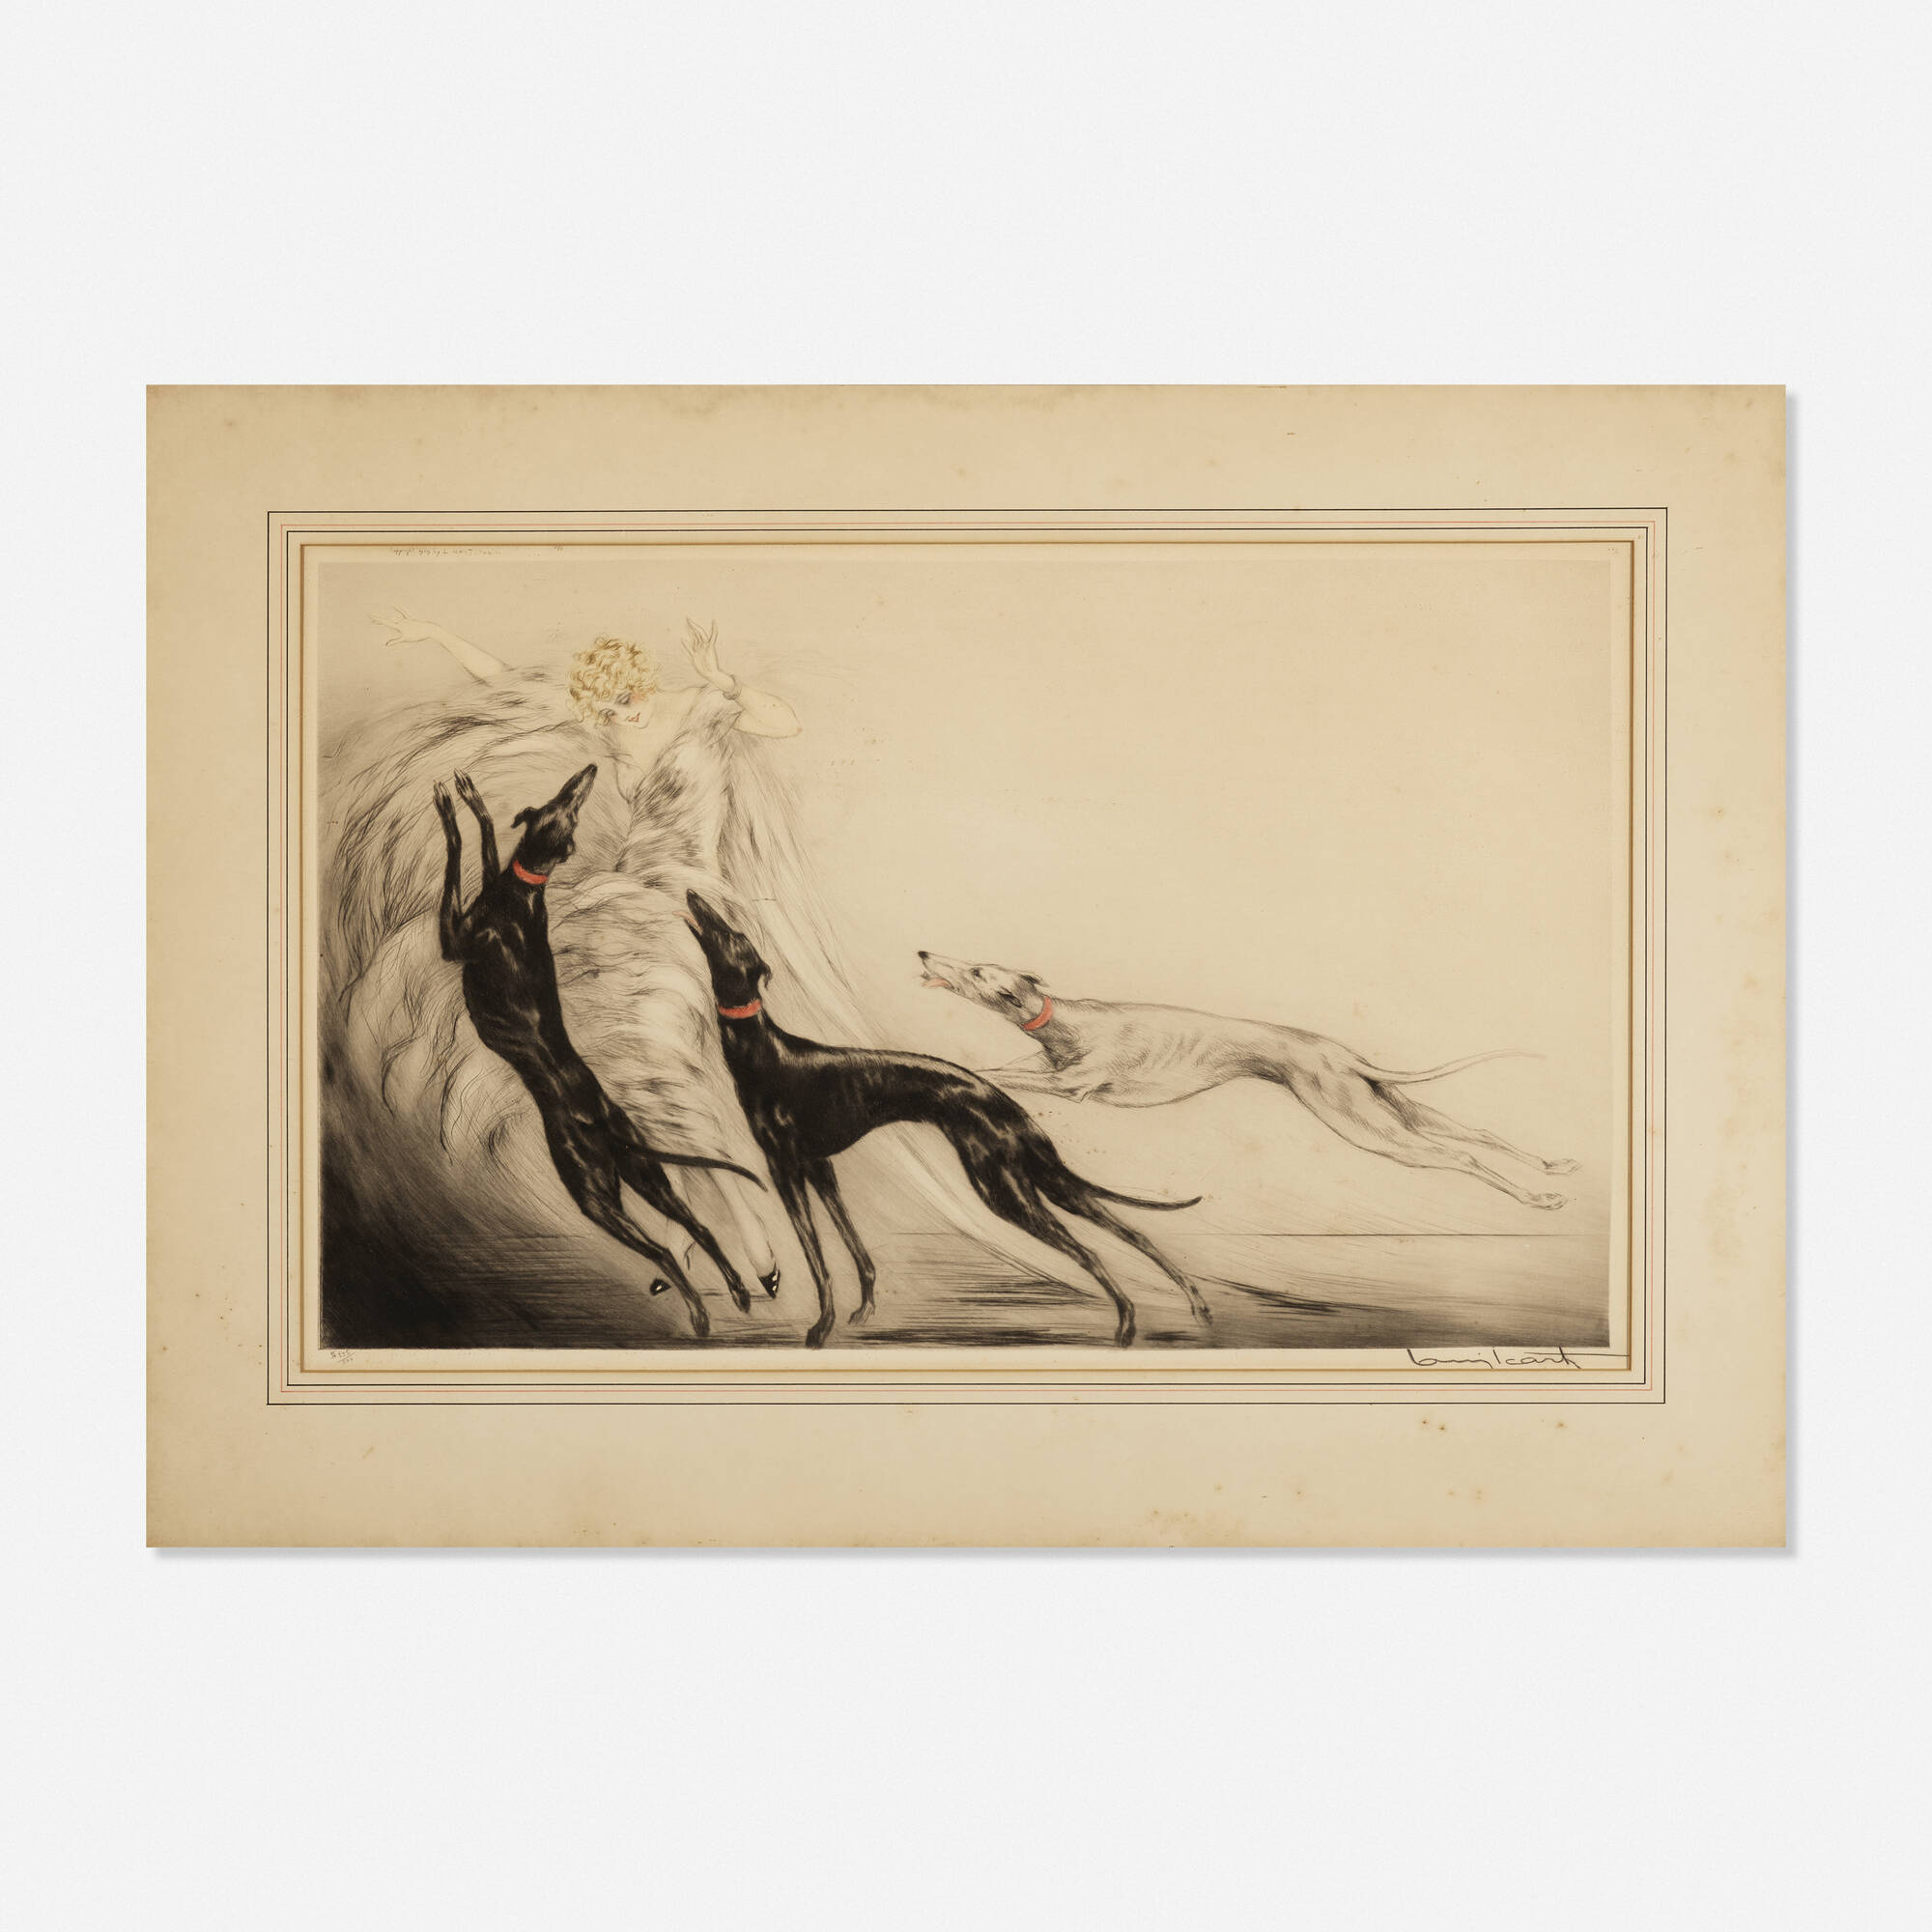 380: LOUIS ICART, Coursing II < Living Contemporary, 29 July 2020